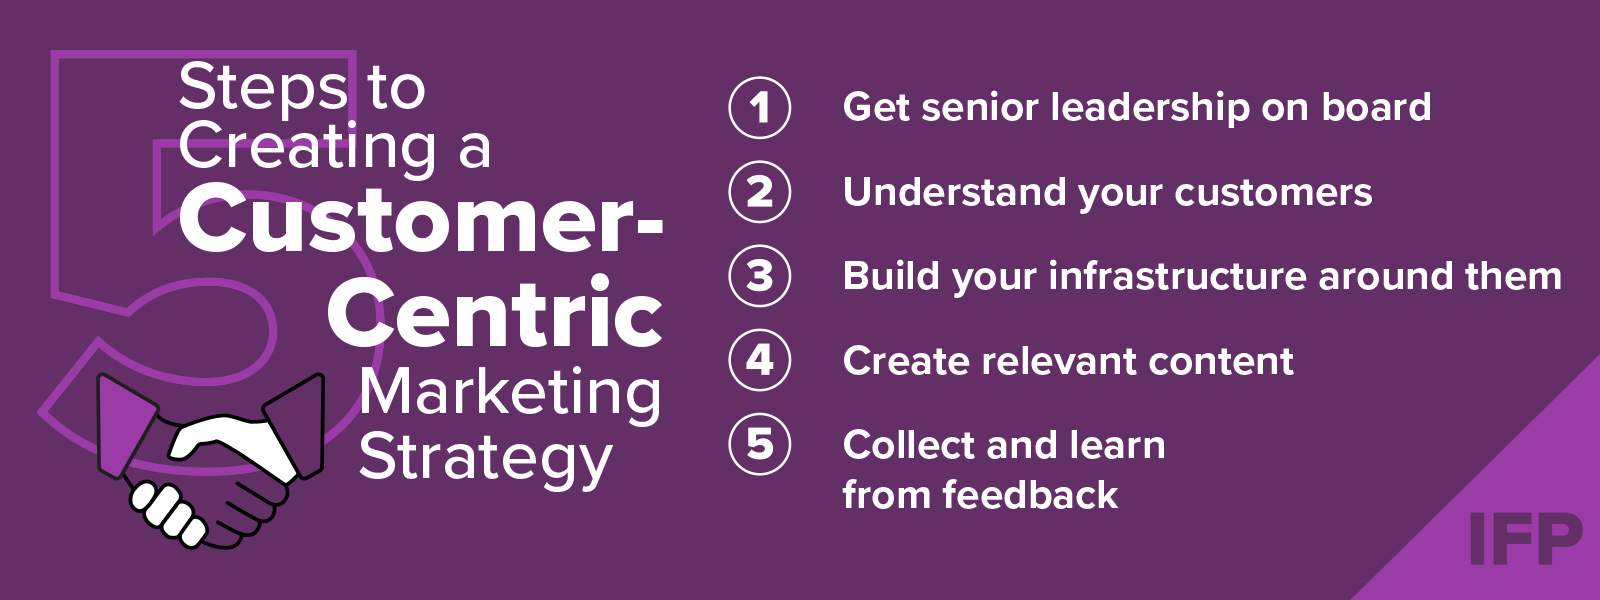 IFP visual on how marketers and businesses can create a customer-centric strategy